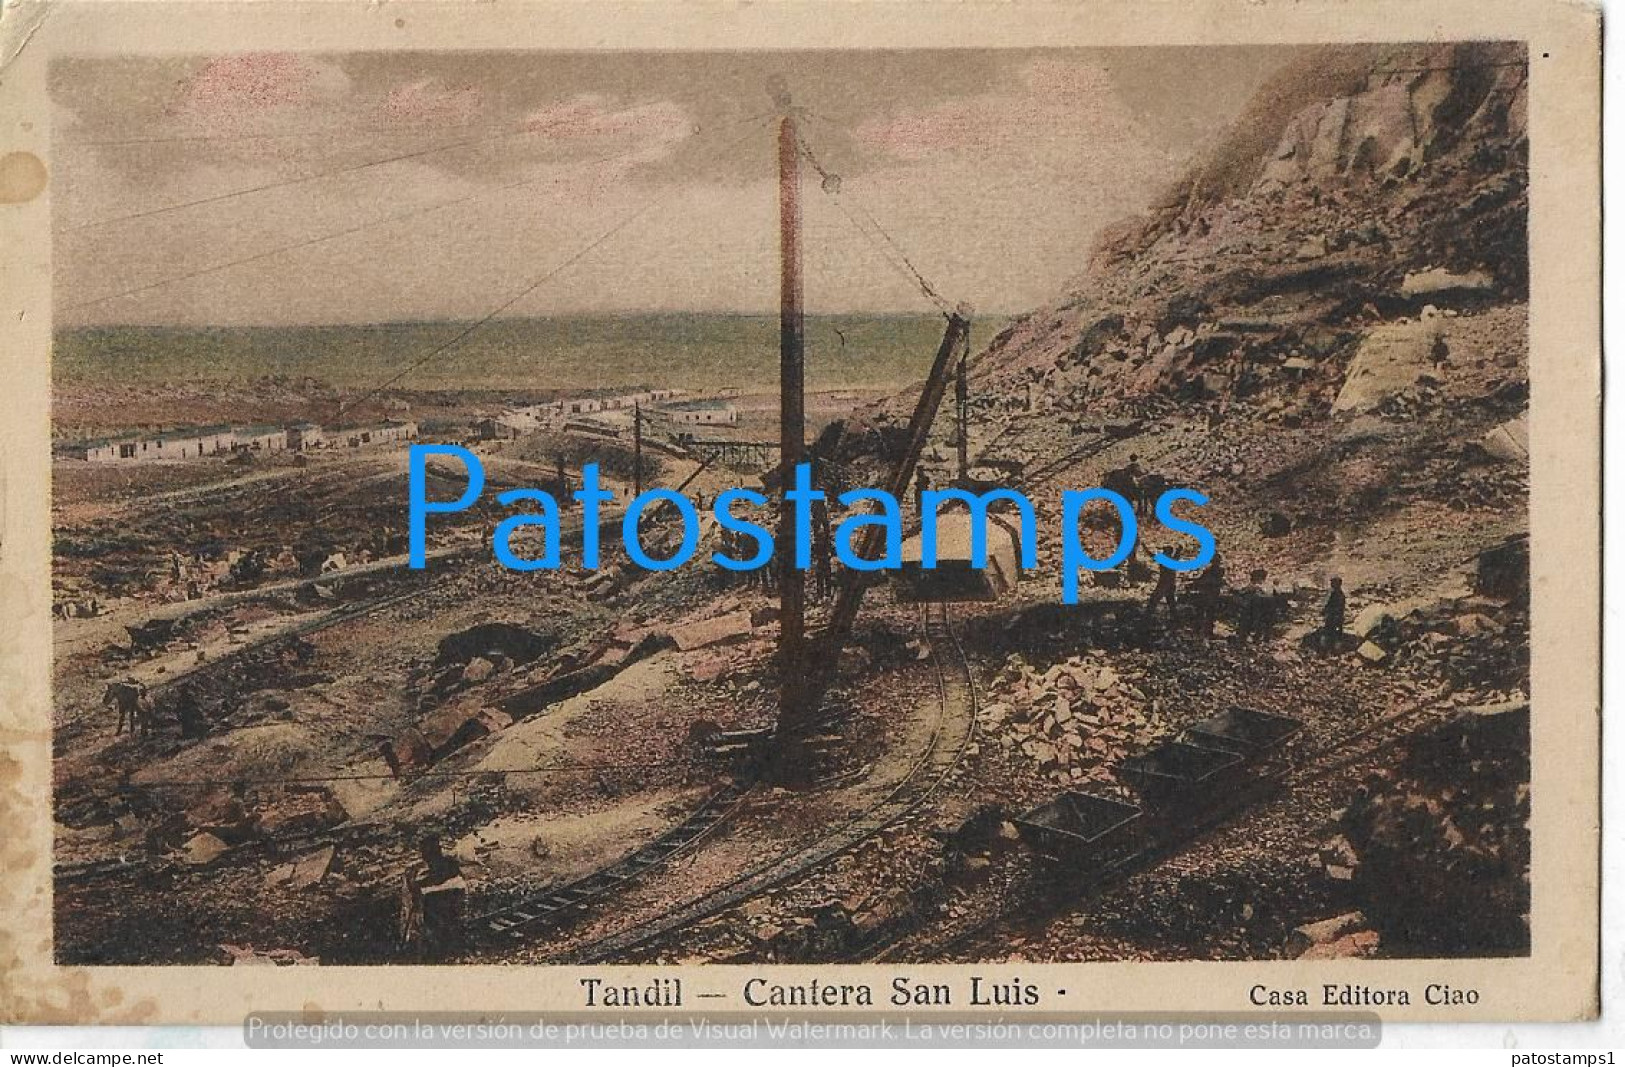 228346 ARGENTINA BUENOS AIRES TANDIL CANTERA SAN LUIS & RAILROAD SPOTTED POSTAL POSTCARD - Argentina